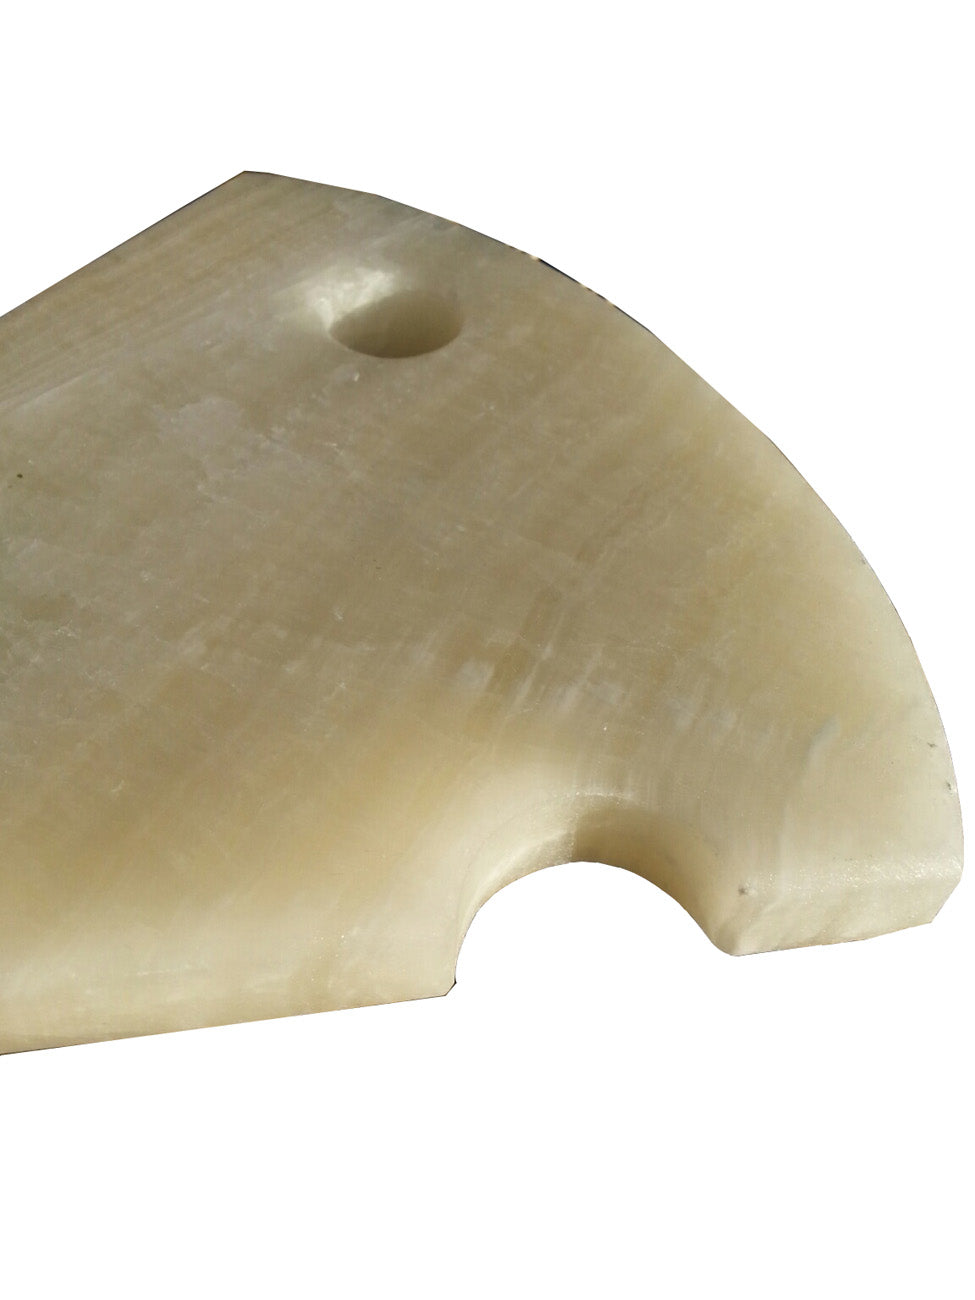 White Onyx Cheeseboards Two Shapes